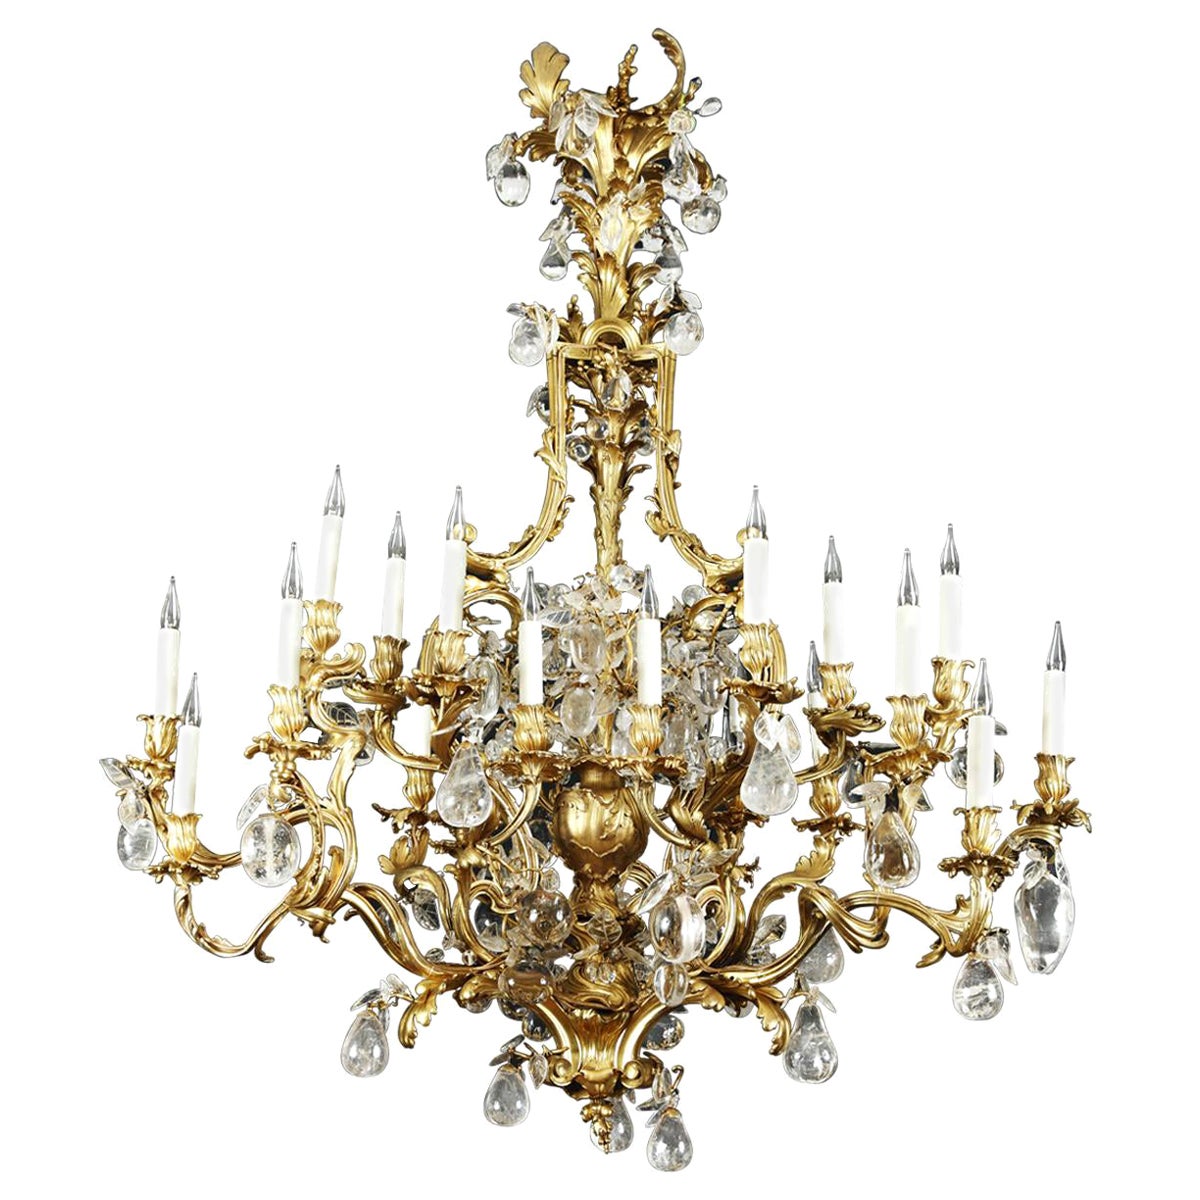 Rare Rock Crystal Chandelier Attributed to L. Messagé, France, circa 1890 For Sale